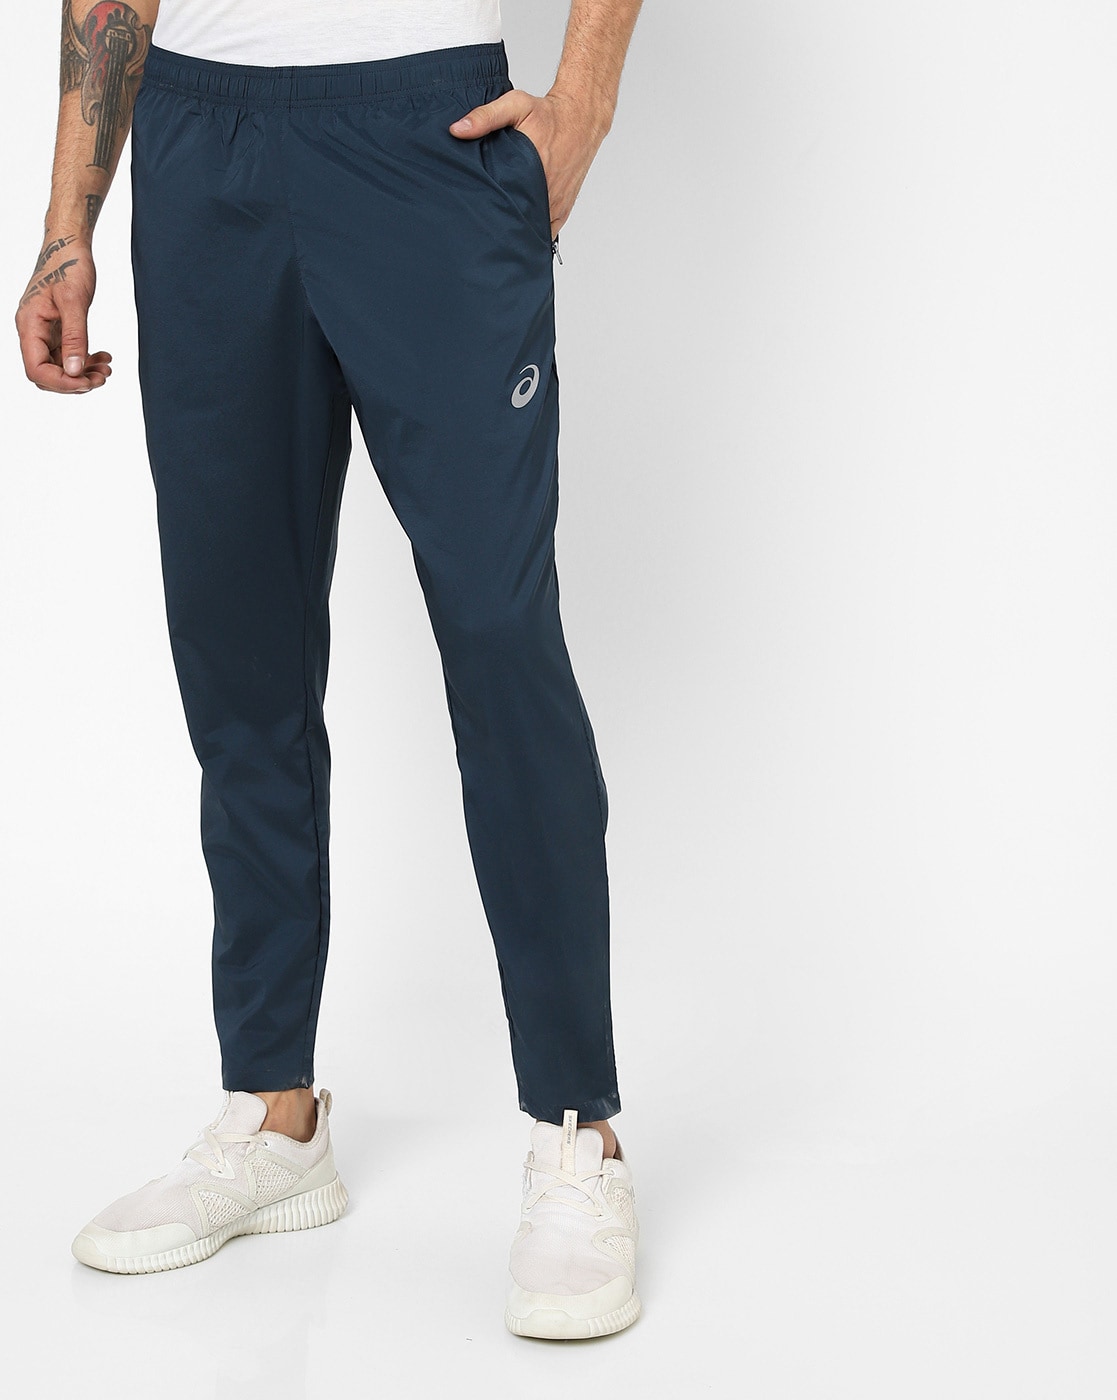 ASICS Sweat Pants  Buy ASICS Ca French Terry Grey Mens Track Pants Online   Nykaa Fashion